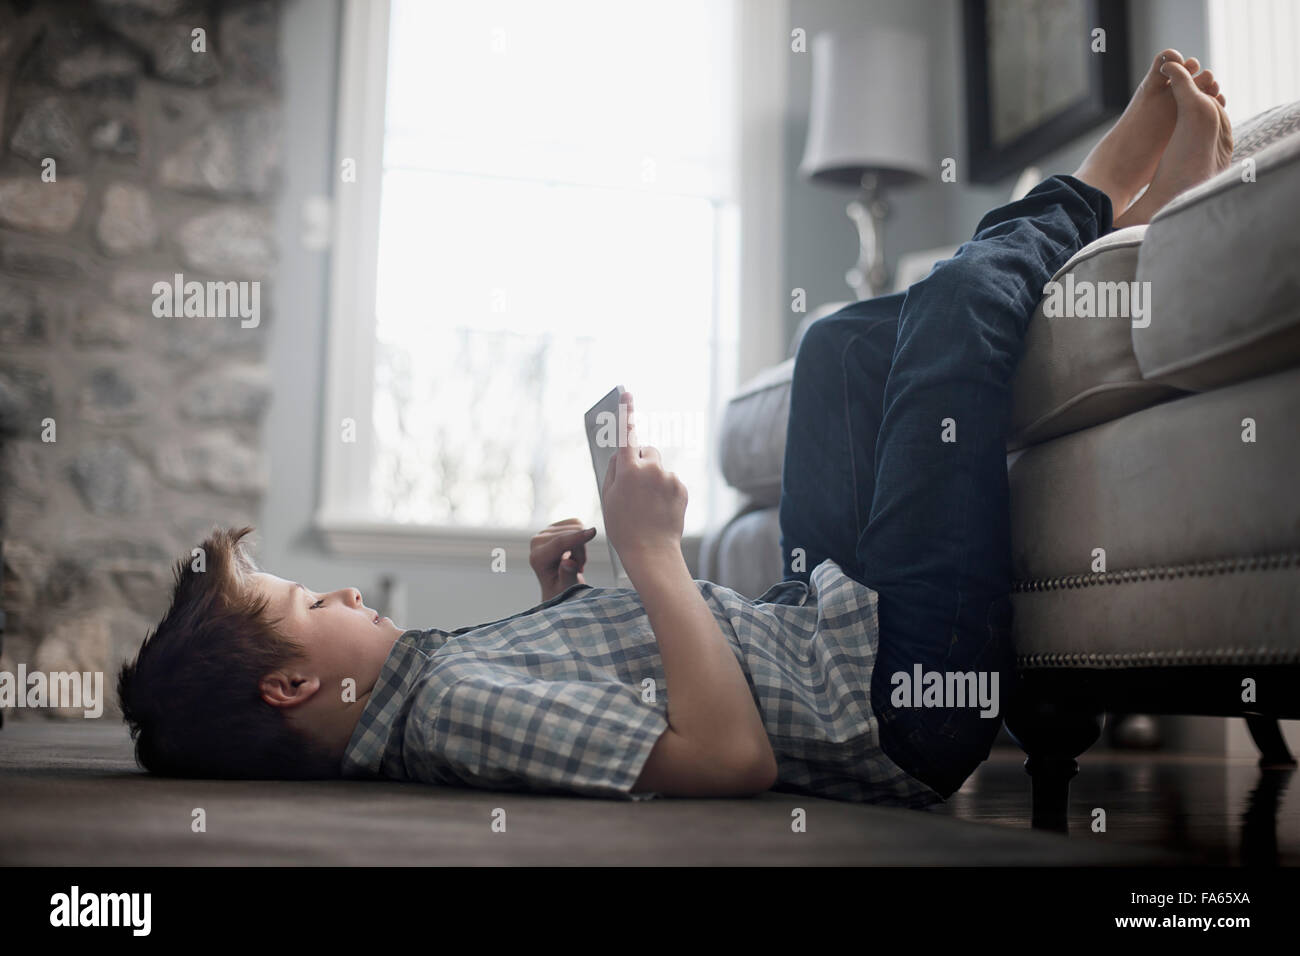 A boy lying on his back on the floor, looking at a digital tablet. Stock Photo